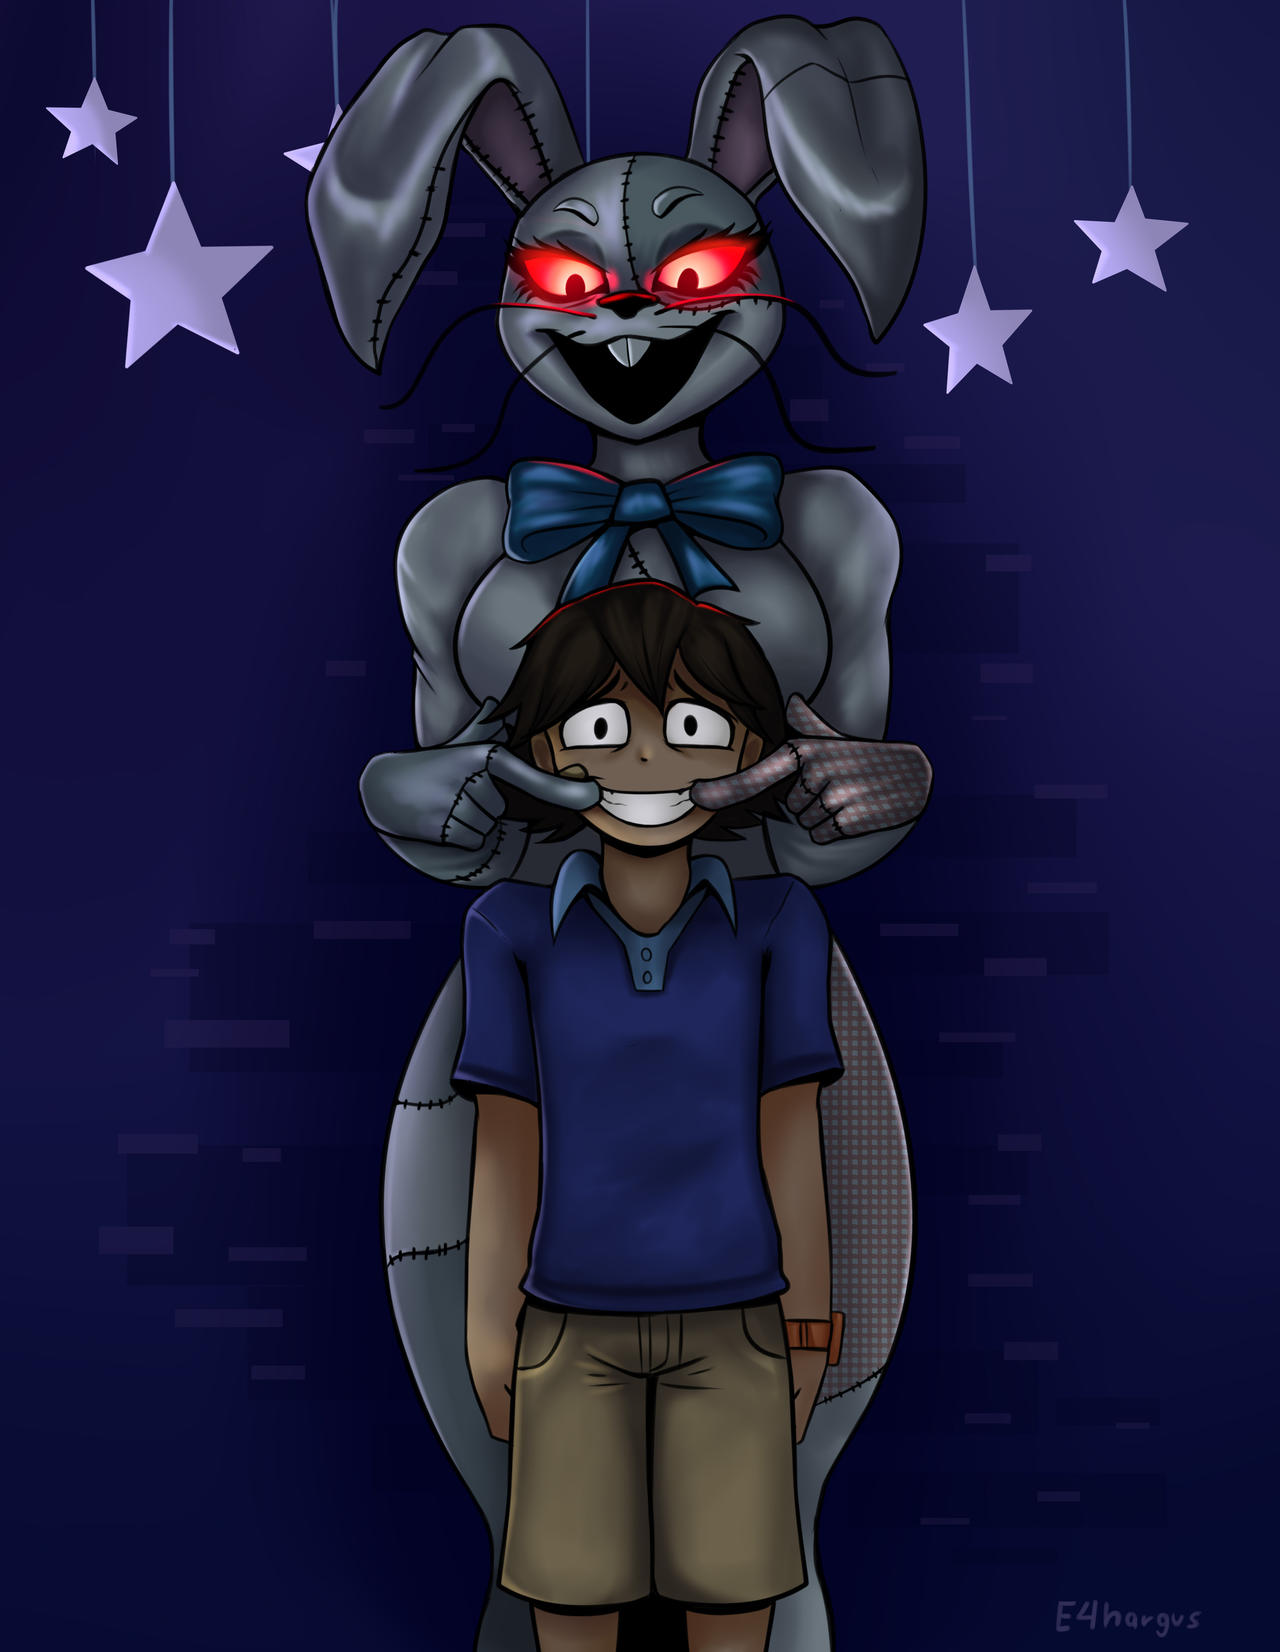 Gregory from FNAF Security Breach! : r/securitybreach